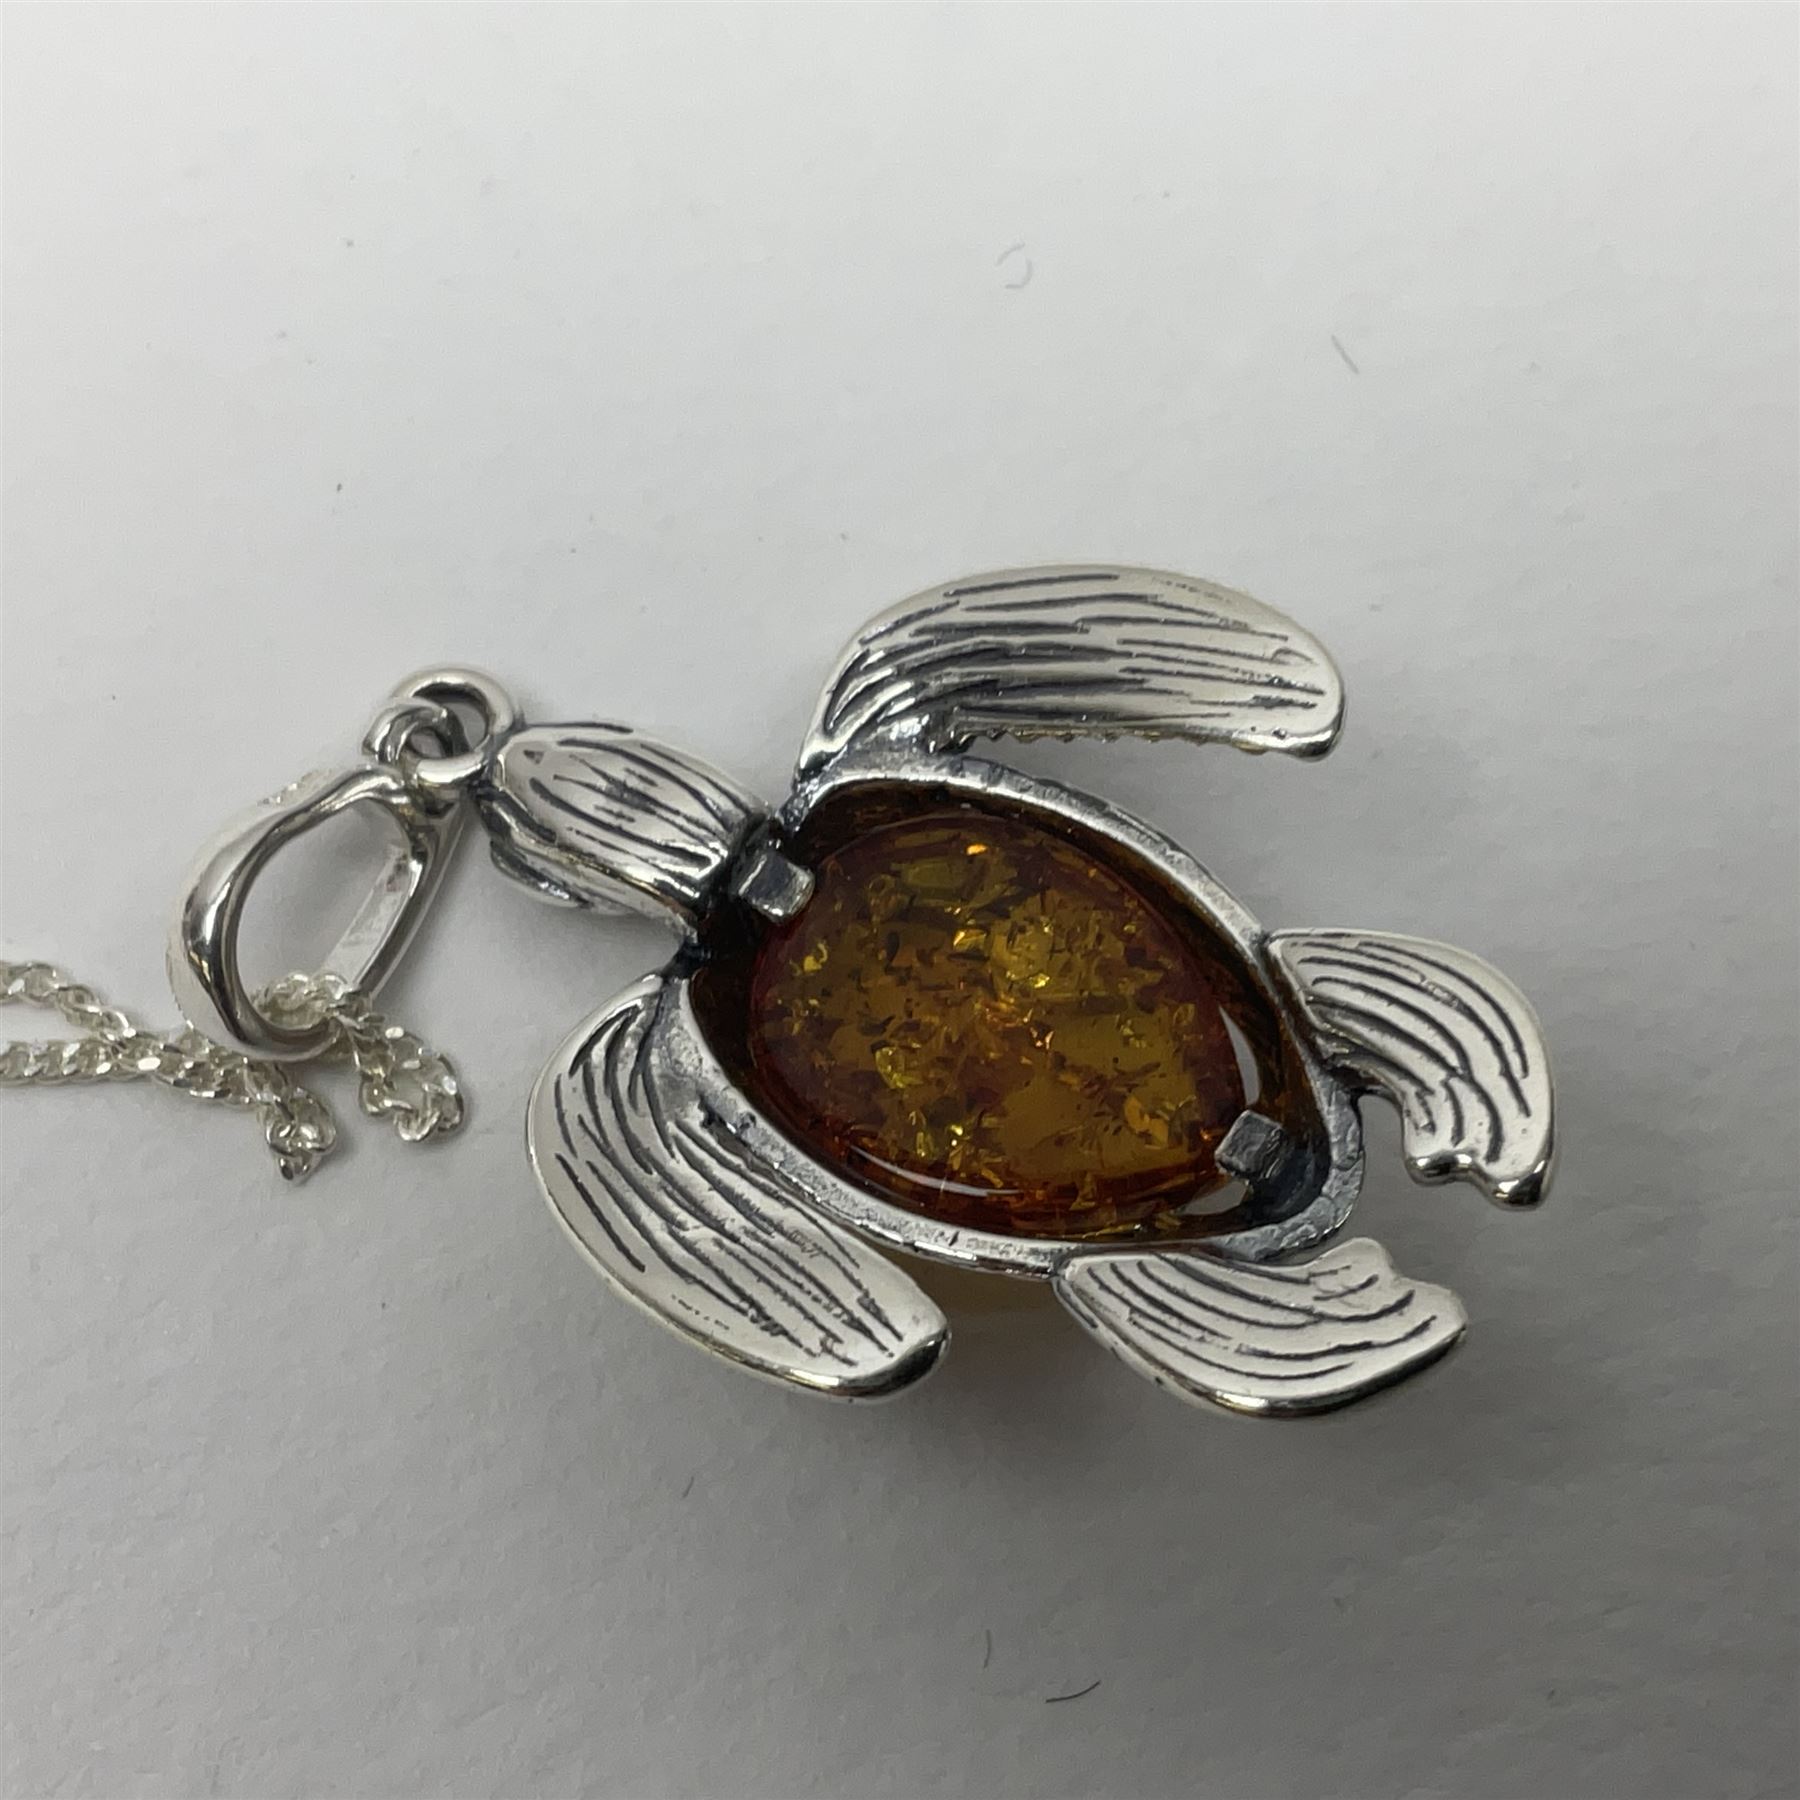 Silver Baltic amber turtle pendant necklace - Image 4 of 5